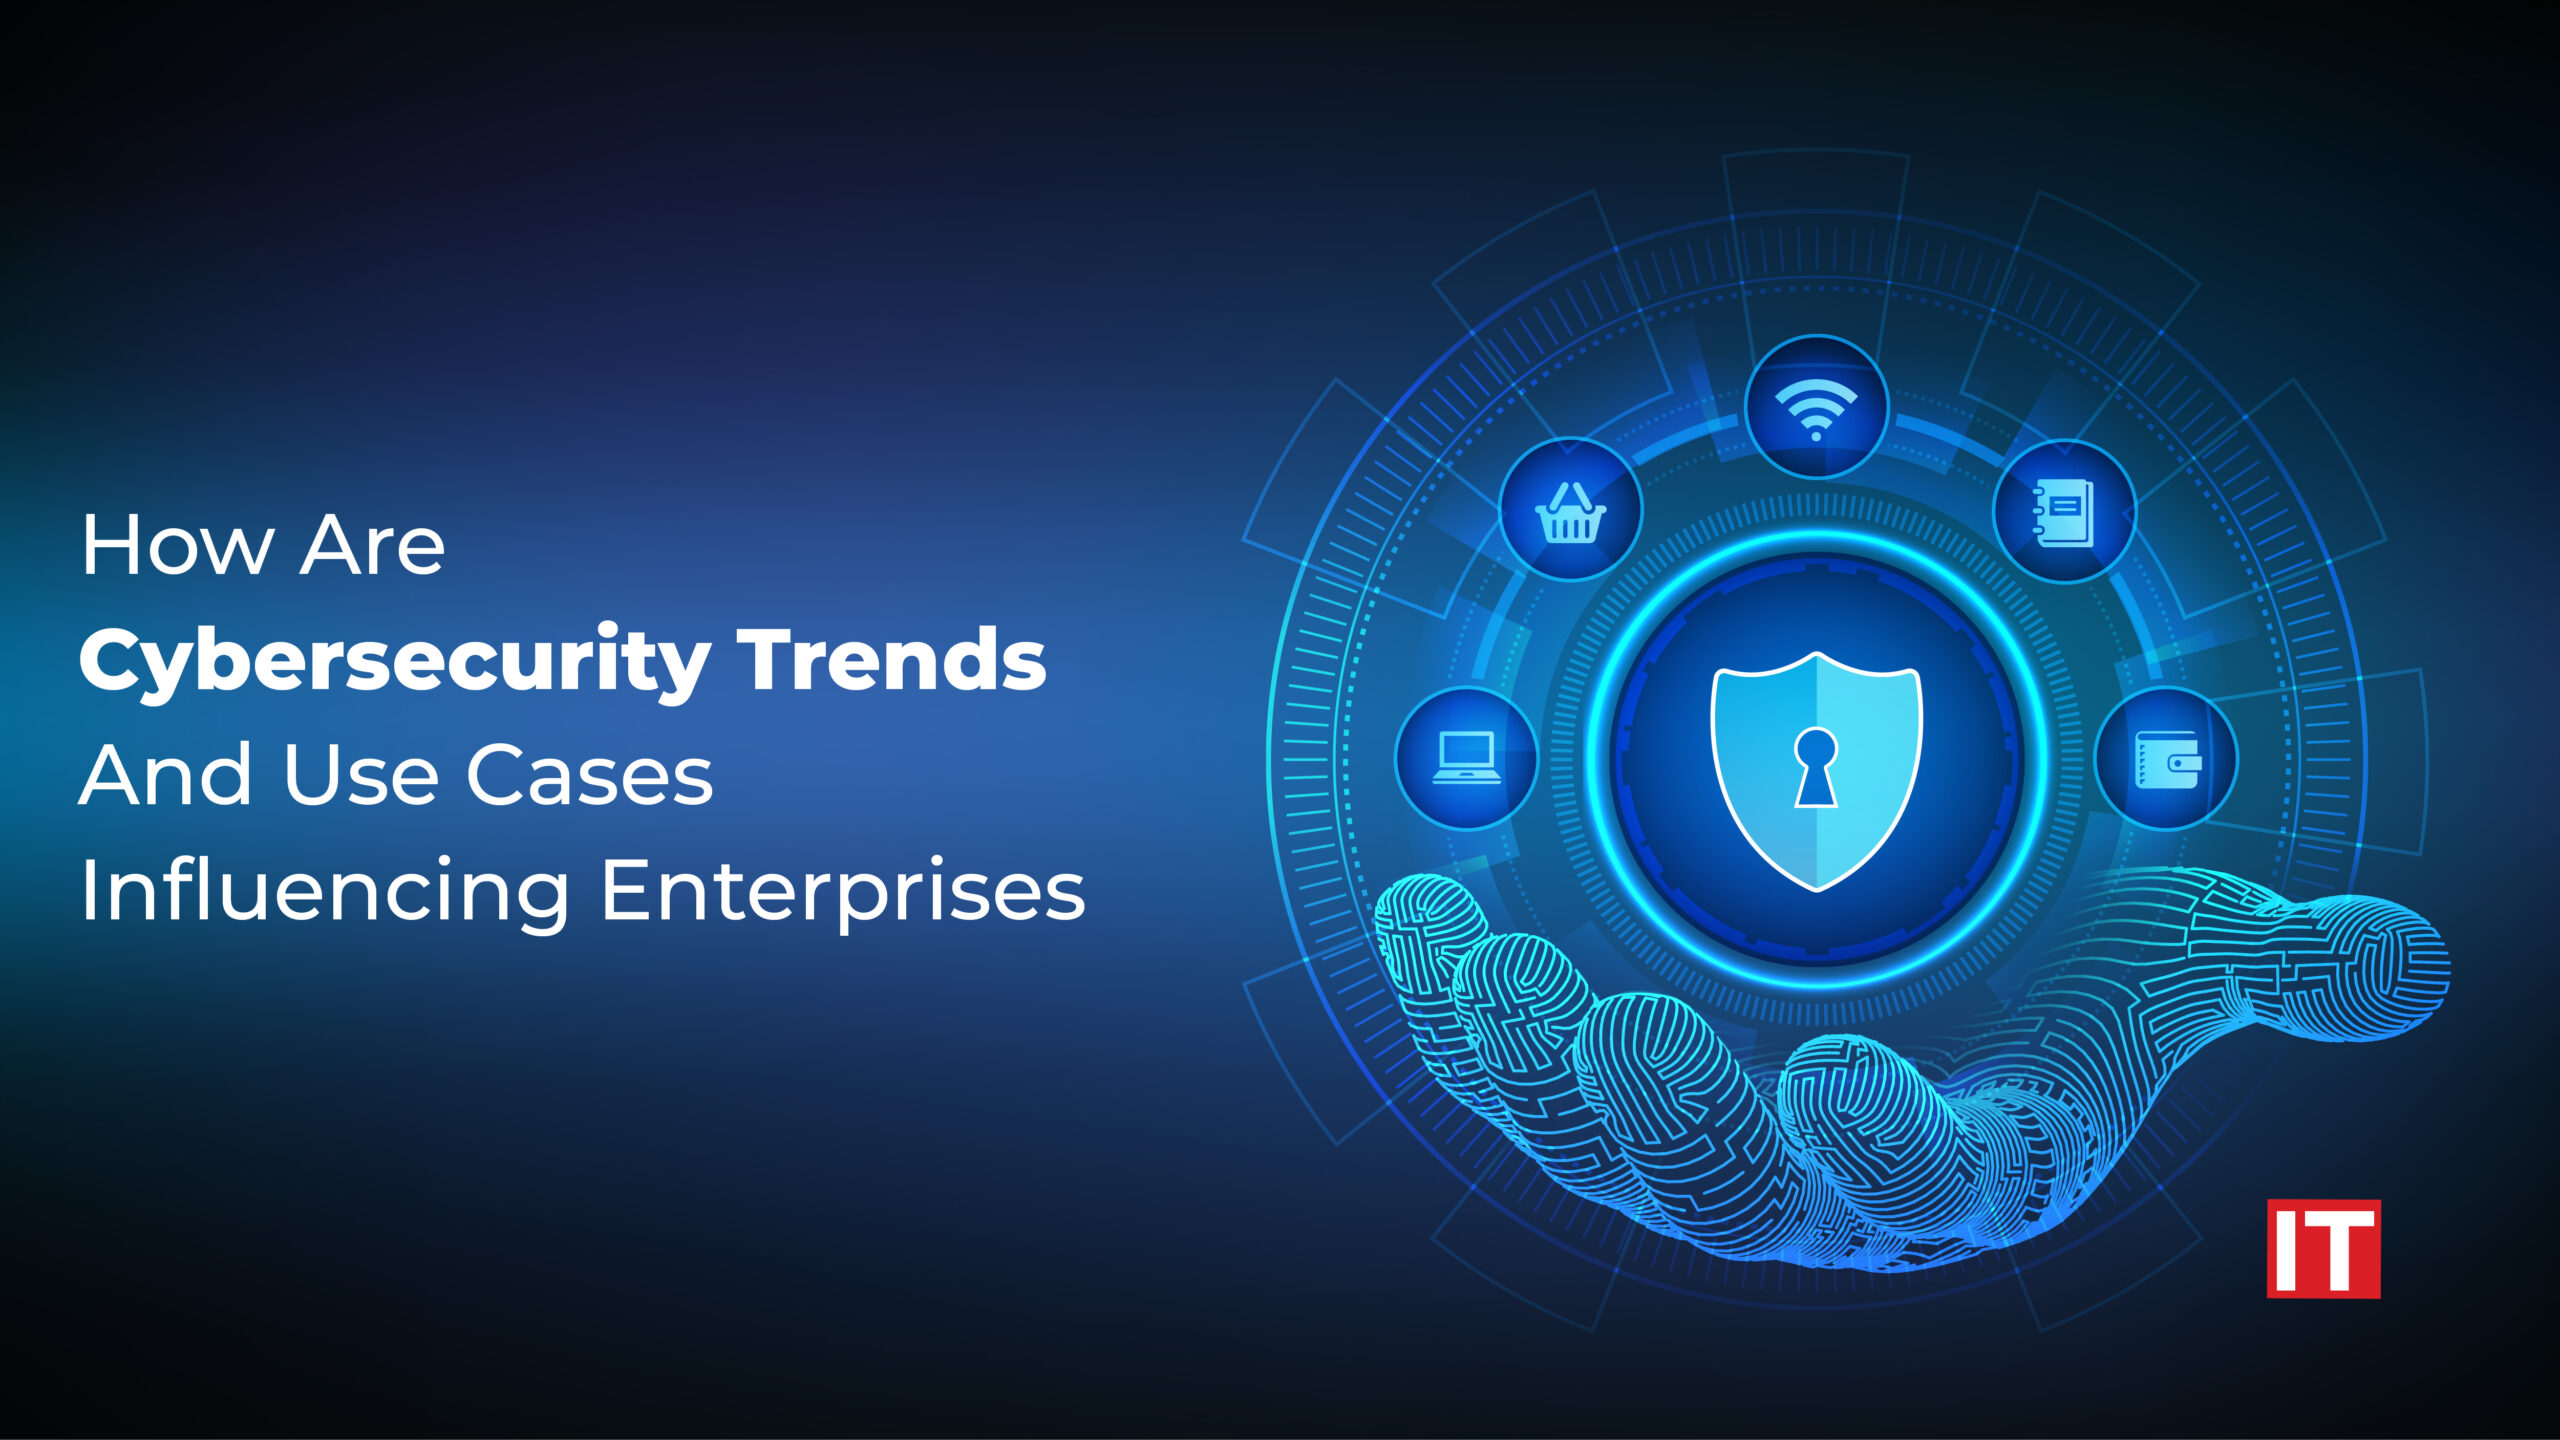 Cybersecurity Trends And Use Cases